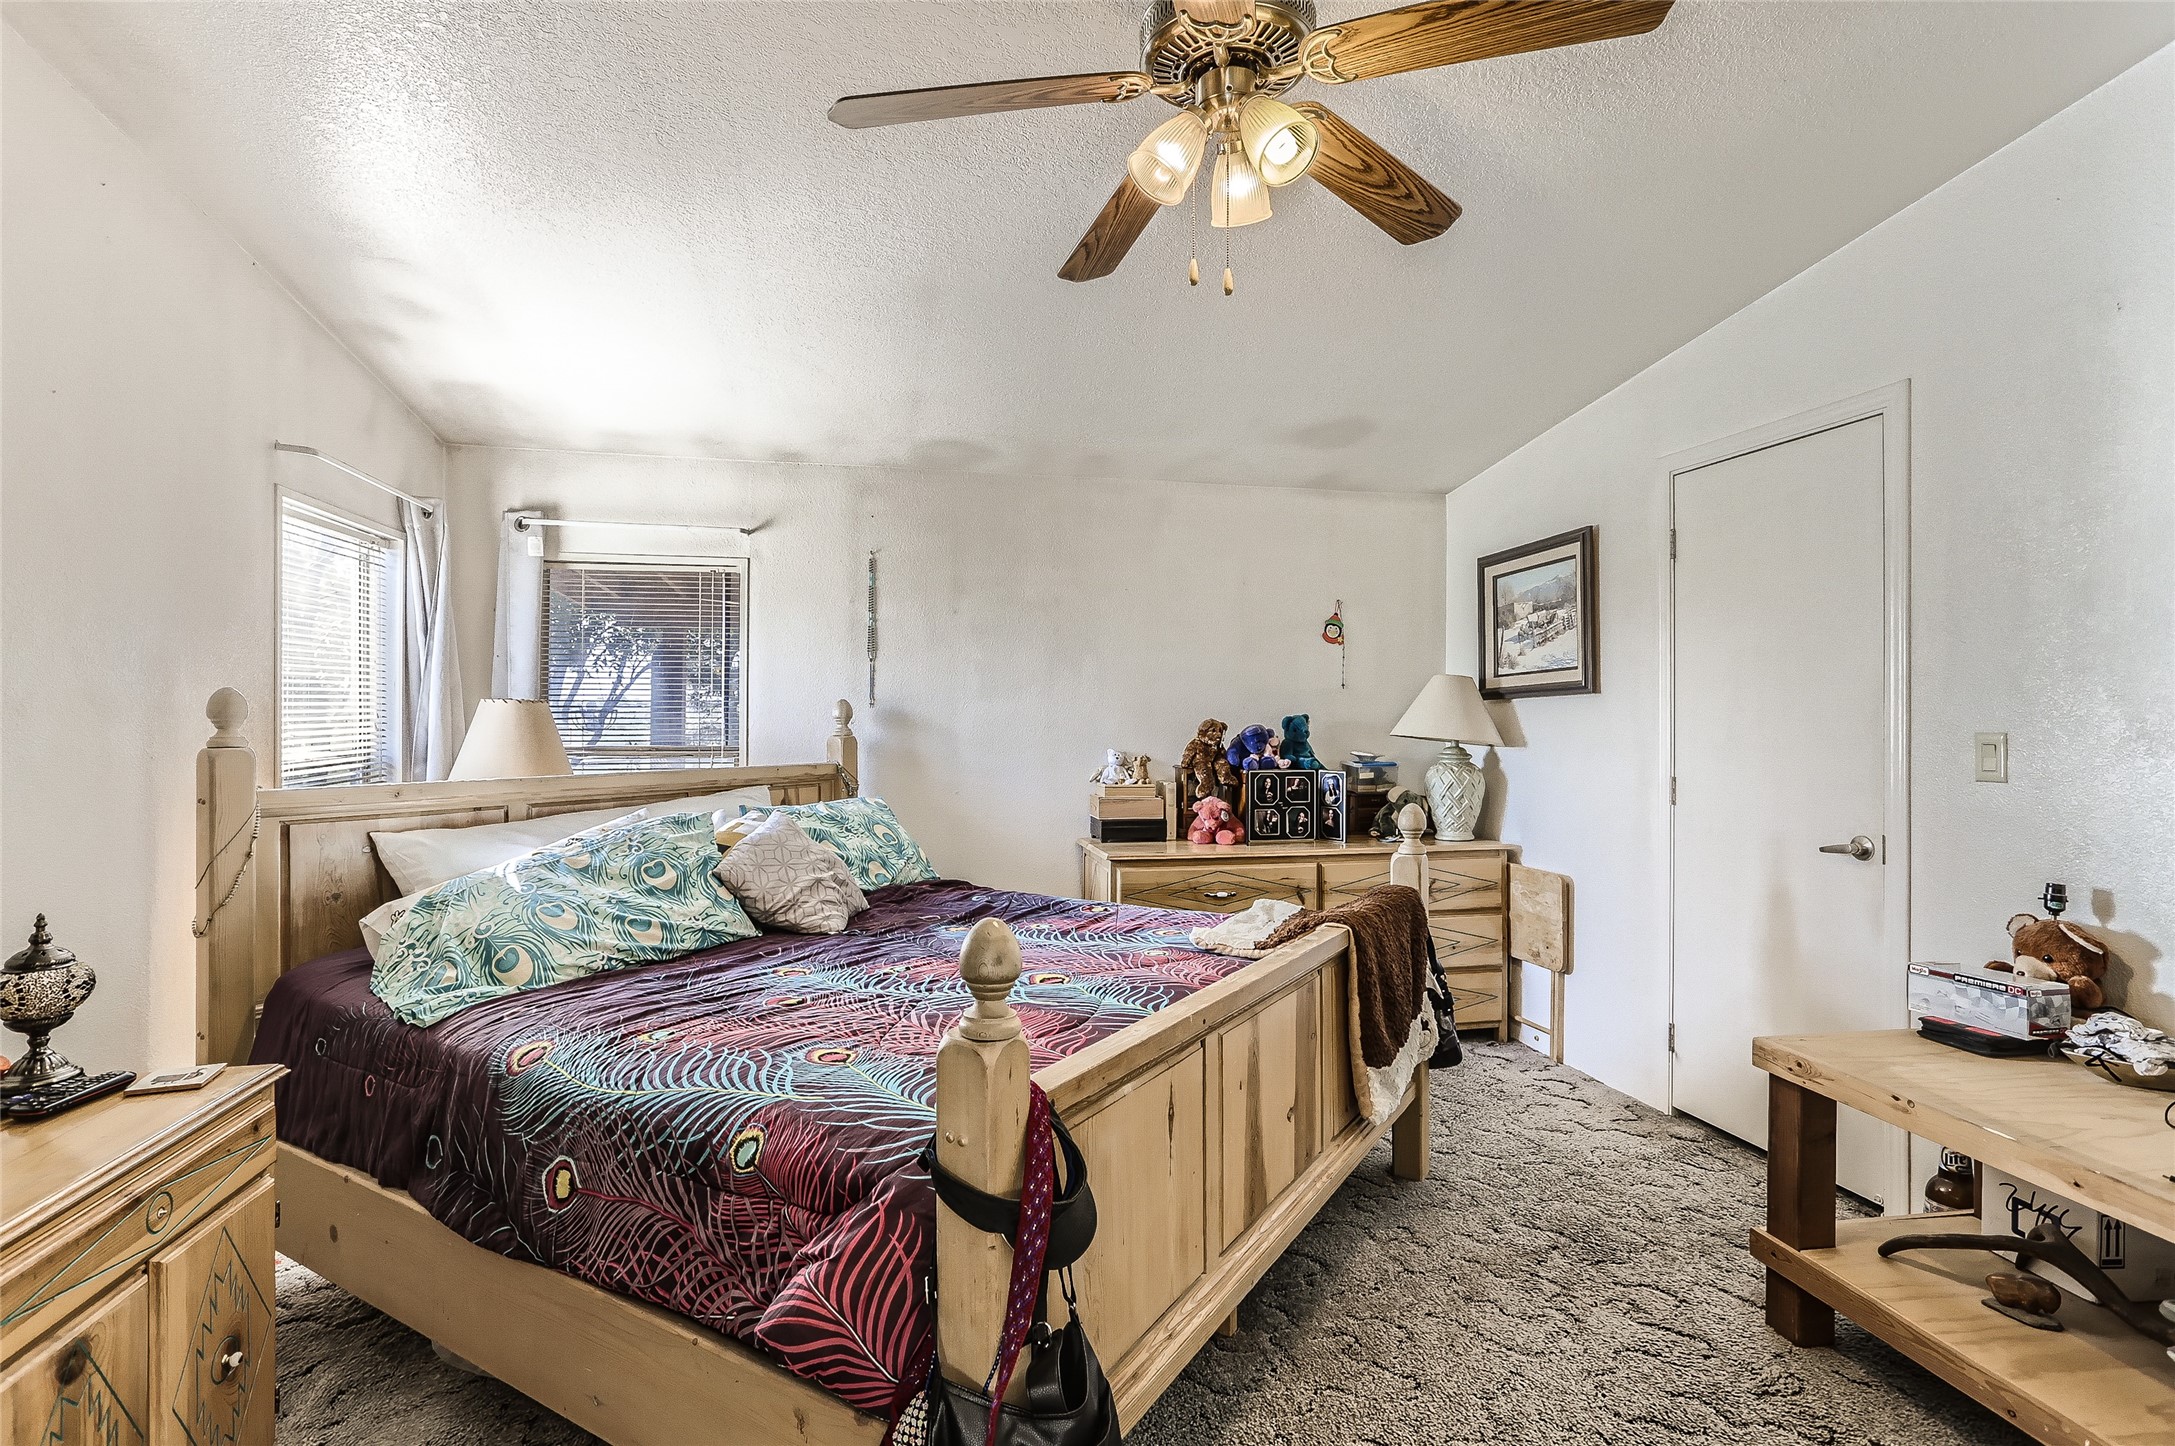 18 W Nambe, Santa Fe, New Mexico 87508, 3 Bedrooms Bedrooms, ,2 BathroomsBathrooms,Residential,For Sale,18 W Nambe,202232313